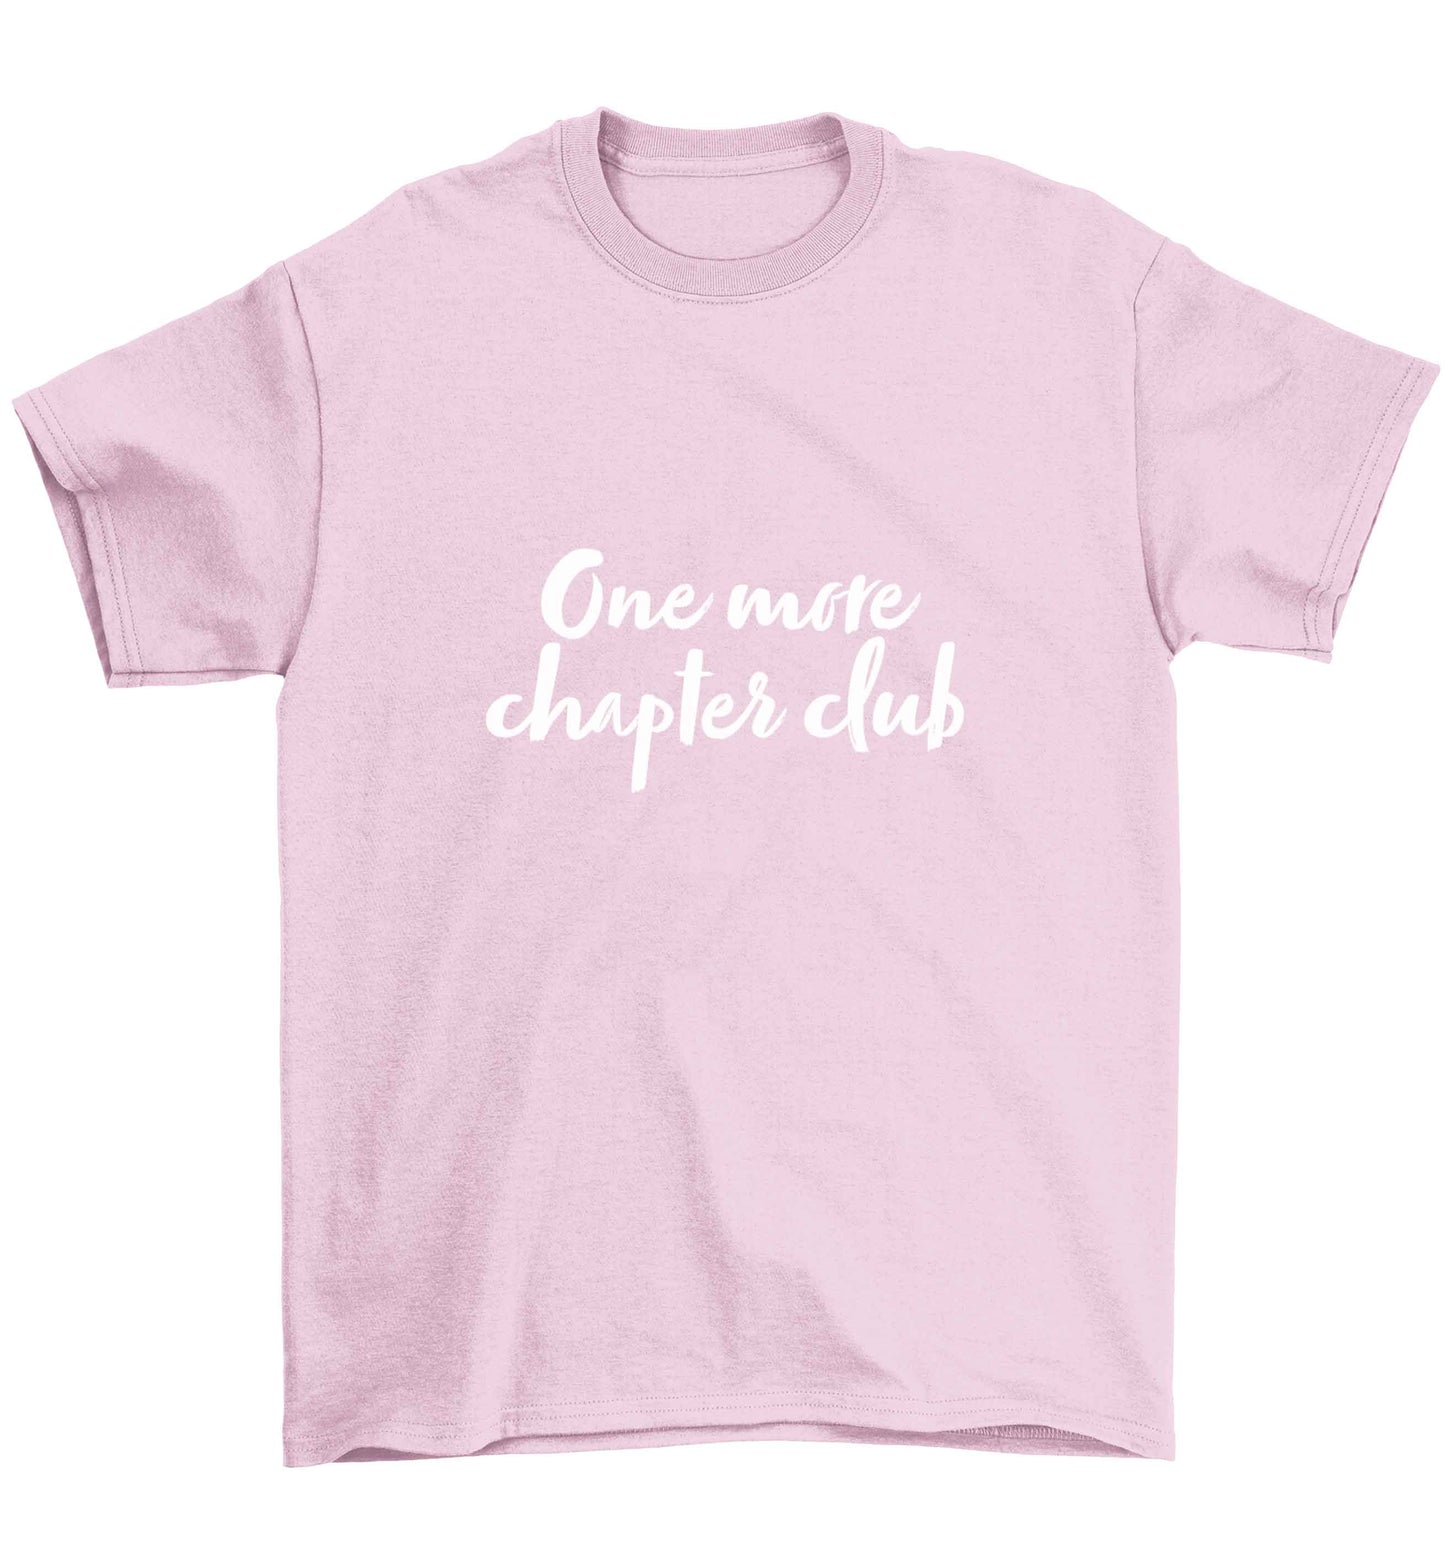 One more chapter club Kit Children's light pink Tshirt 12-13 Years